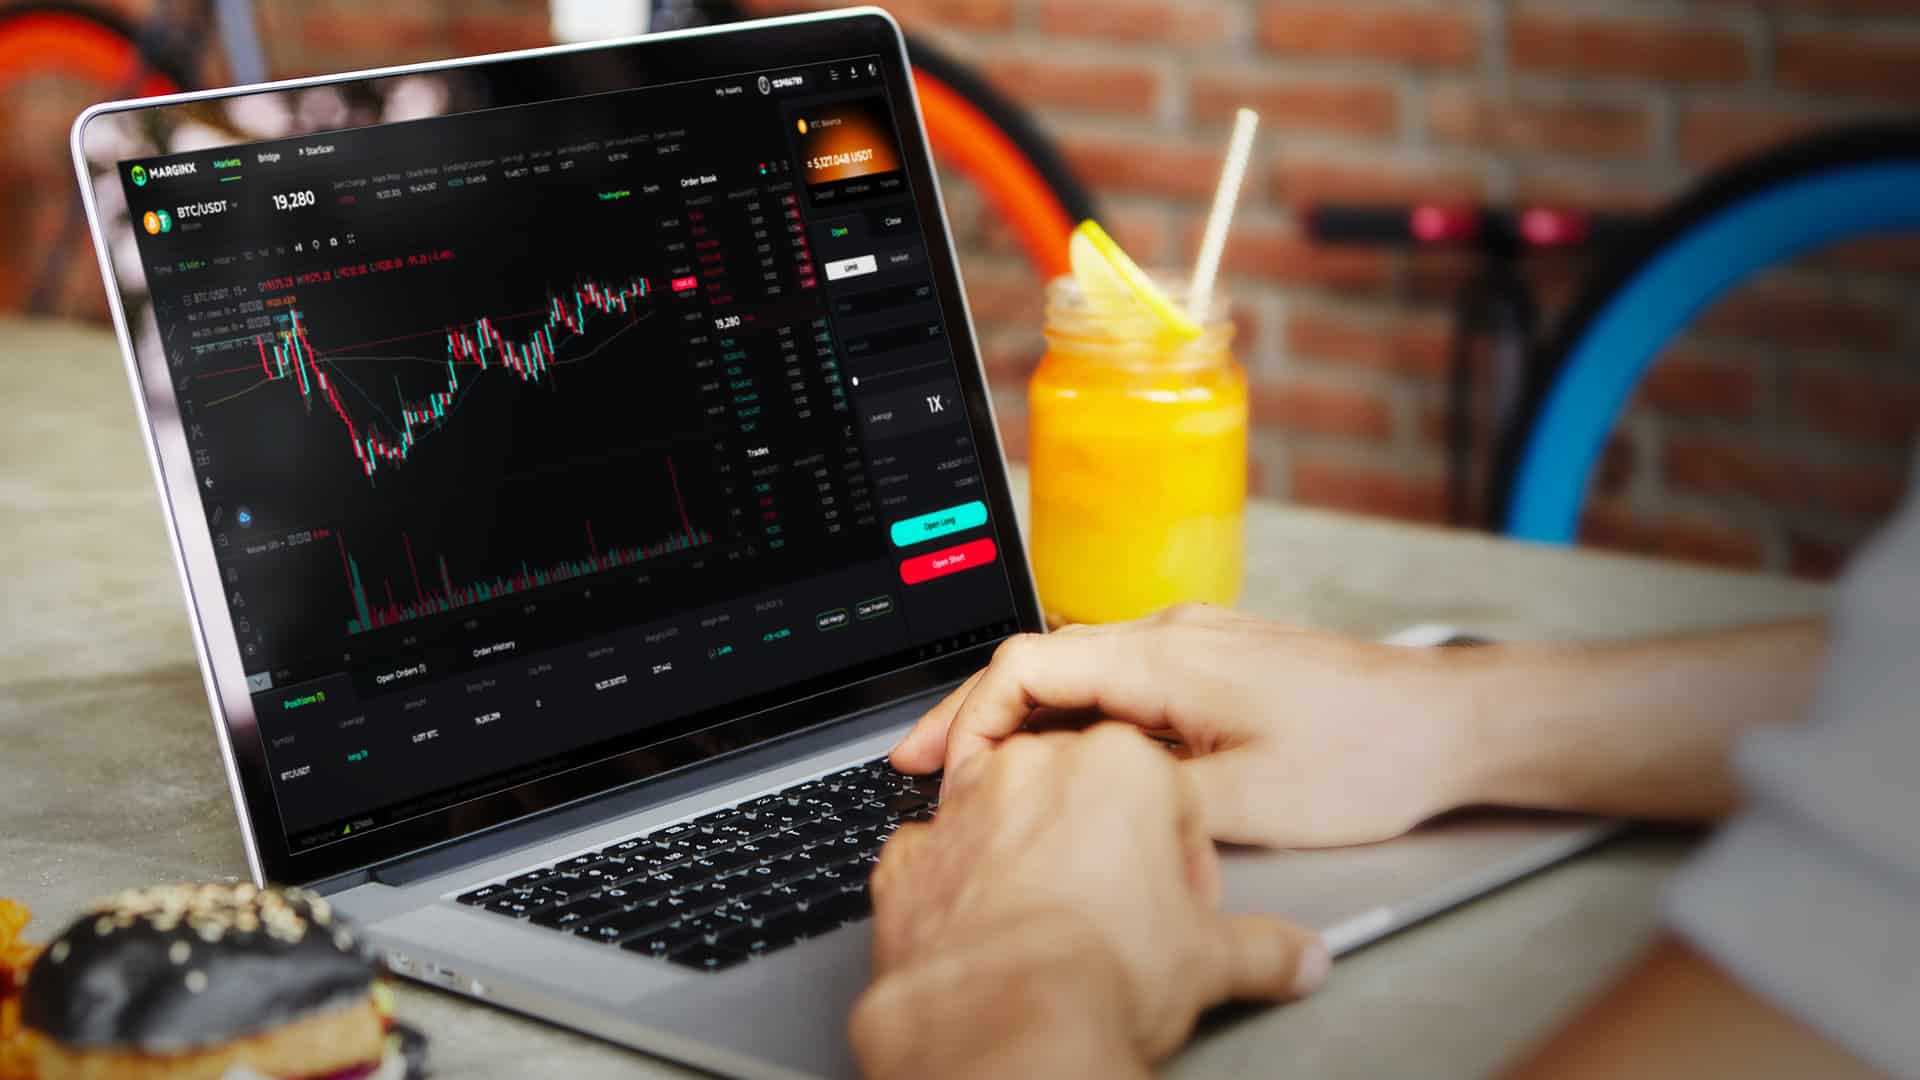 MarginX, the World's First Community-Based Decentralized Exchange, Launches on the Function X Blockchain